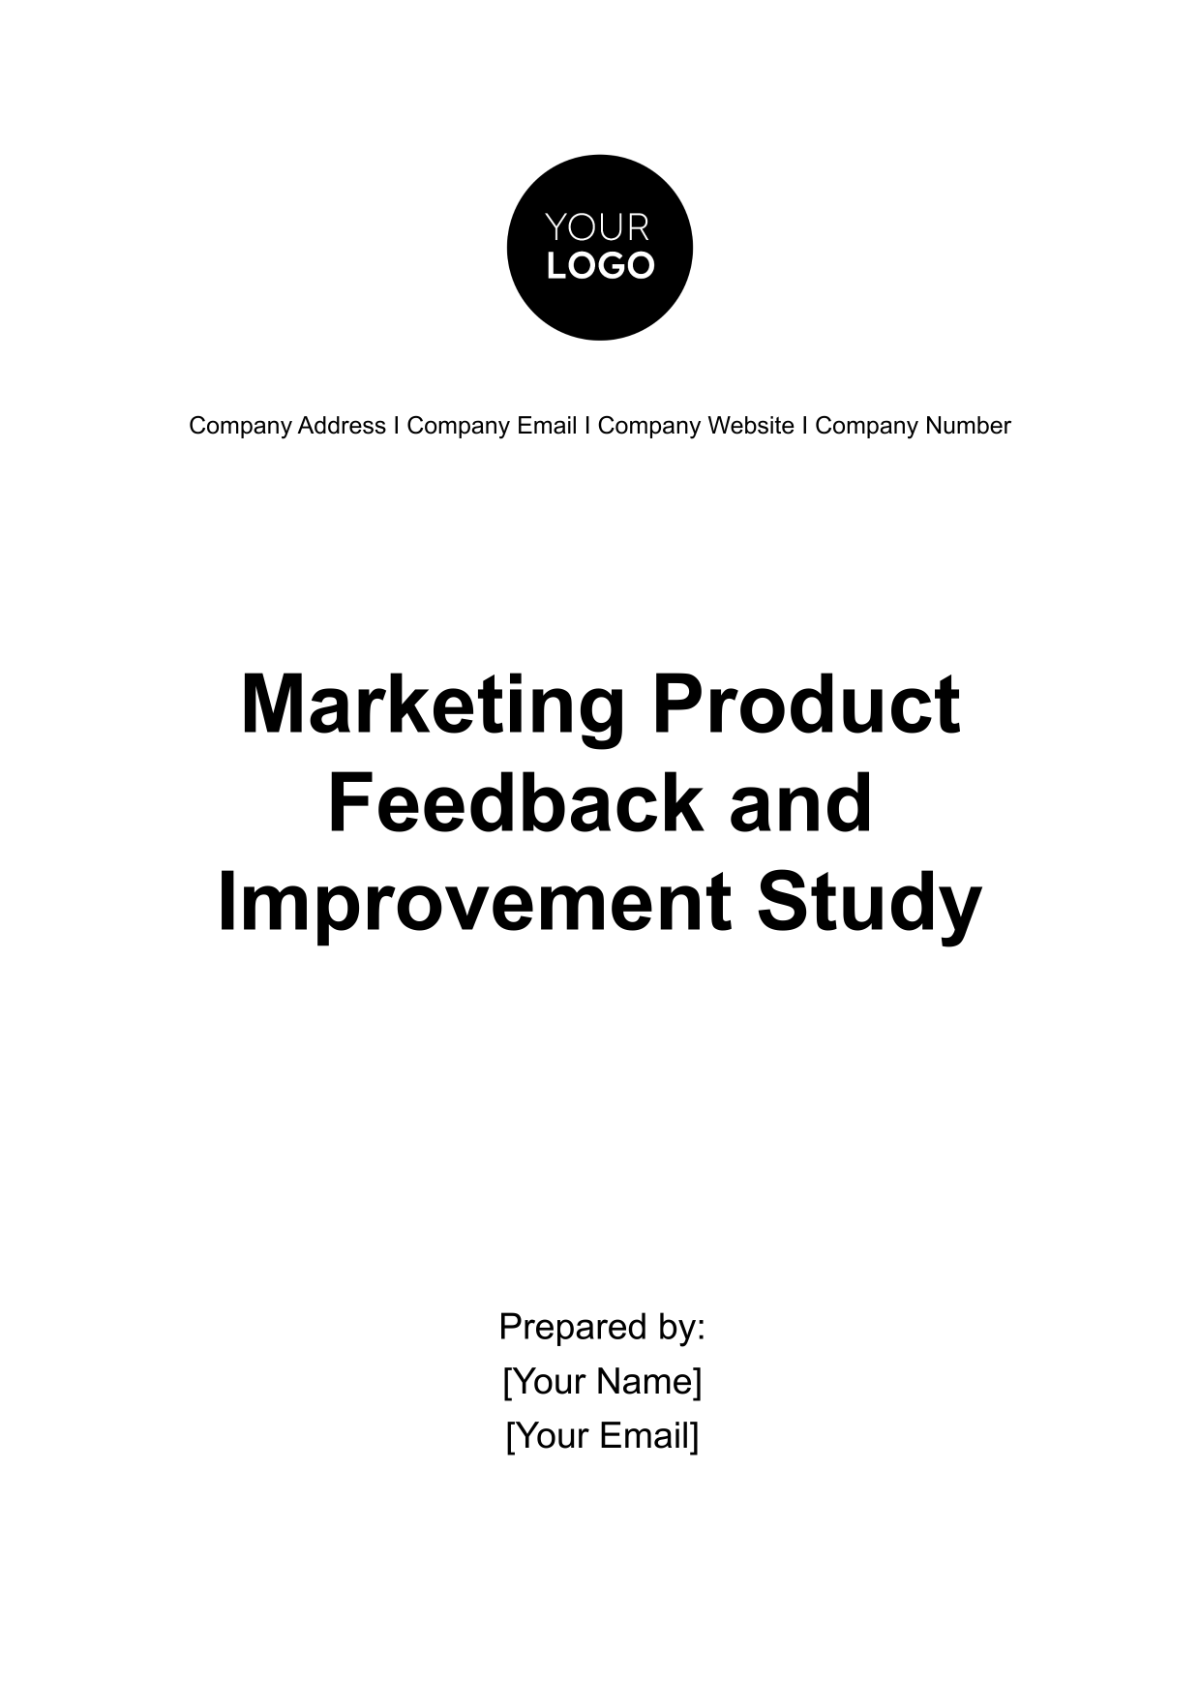 Free Marketing Product Feedback and Improvement Study Template